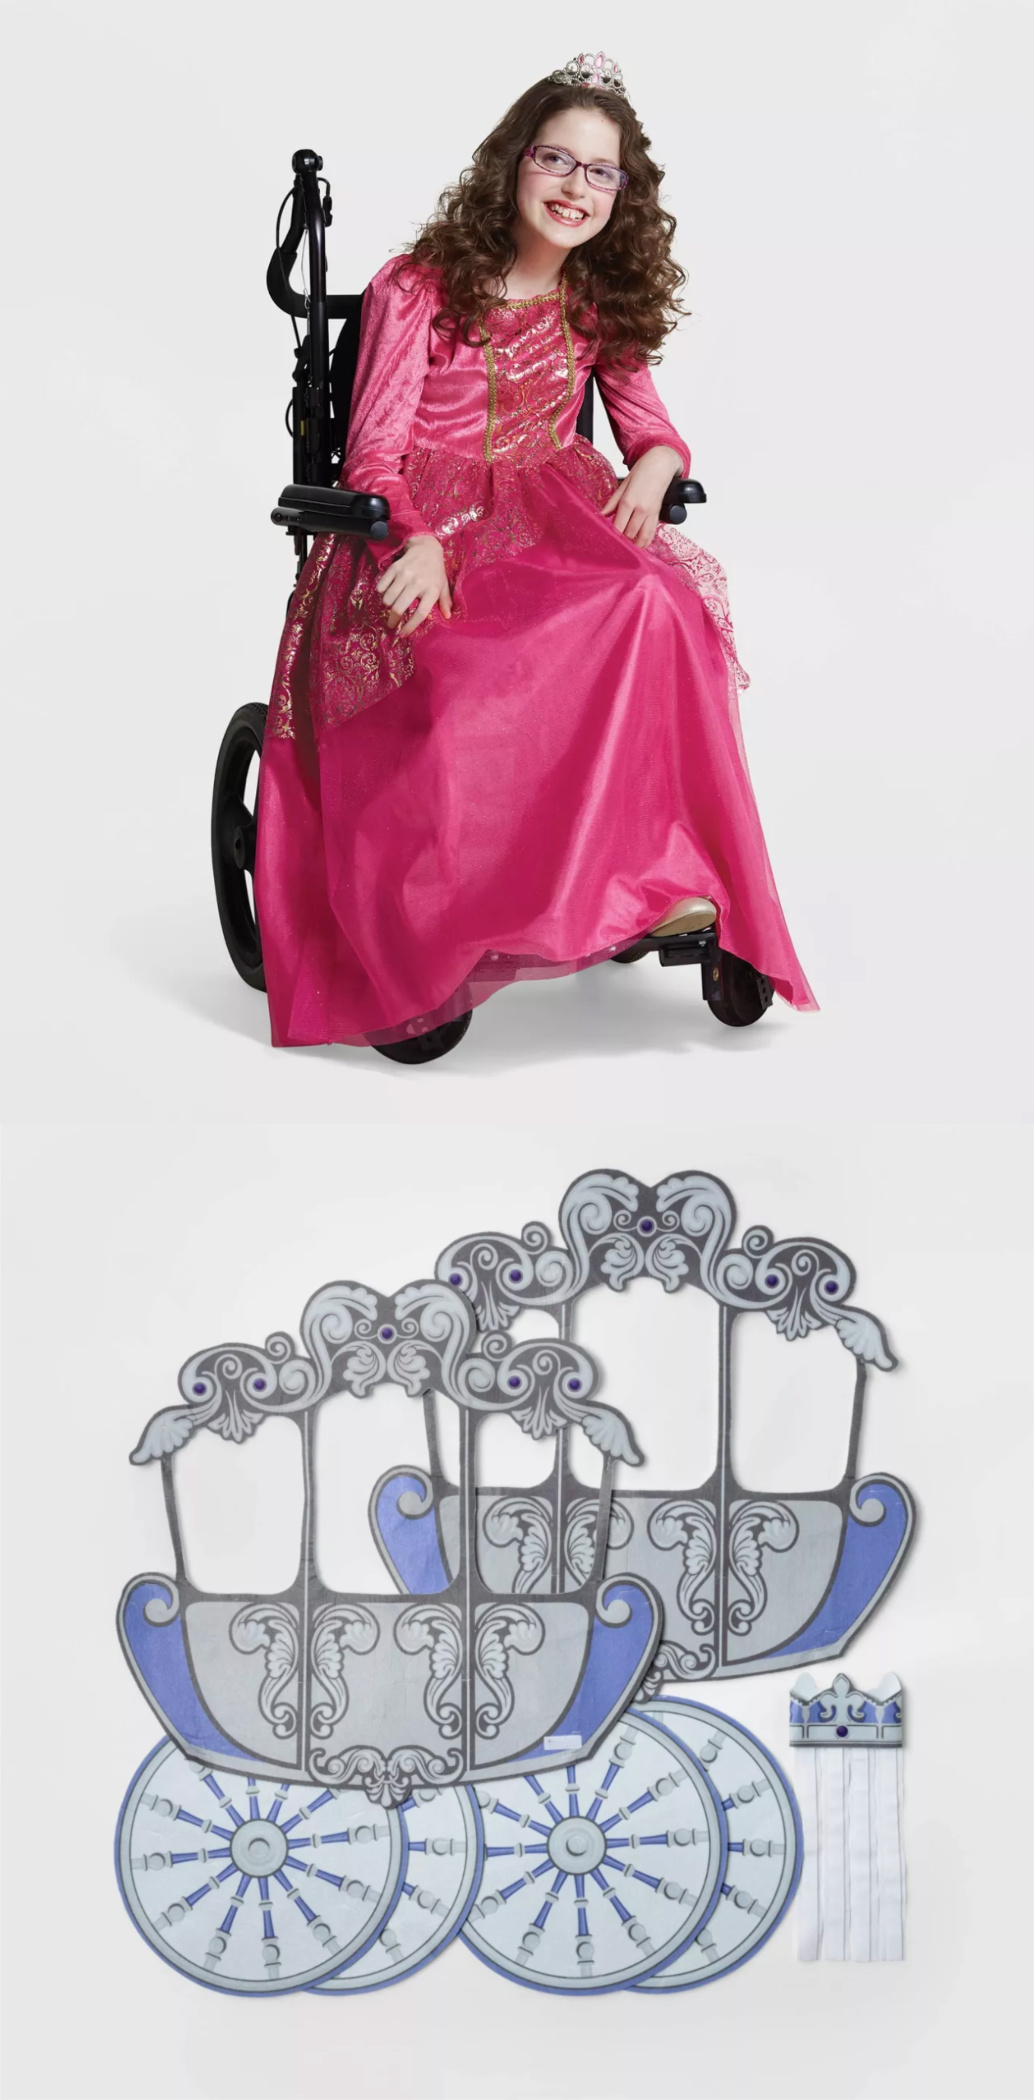 Target adaptive Princess Halloween costumes designed for wheelchair access and the wheelchair can be decked out too!